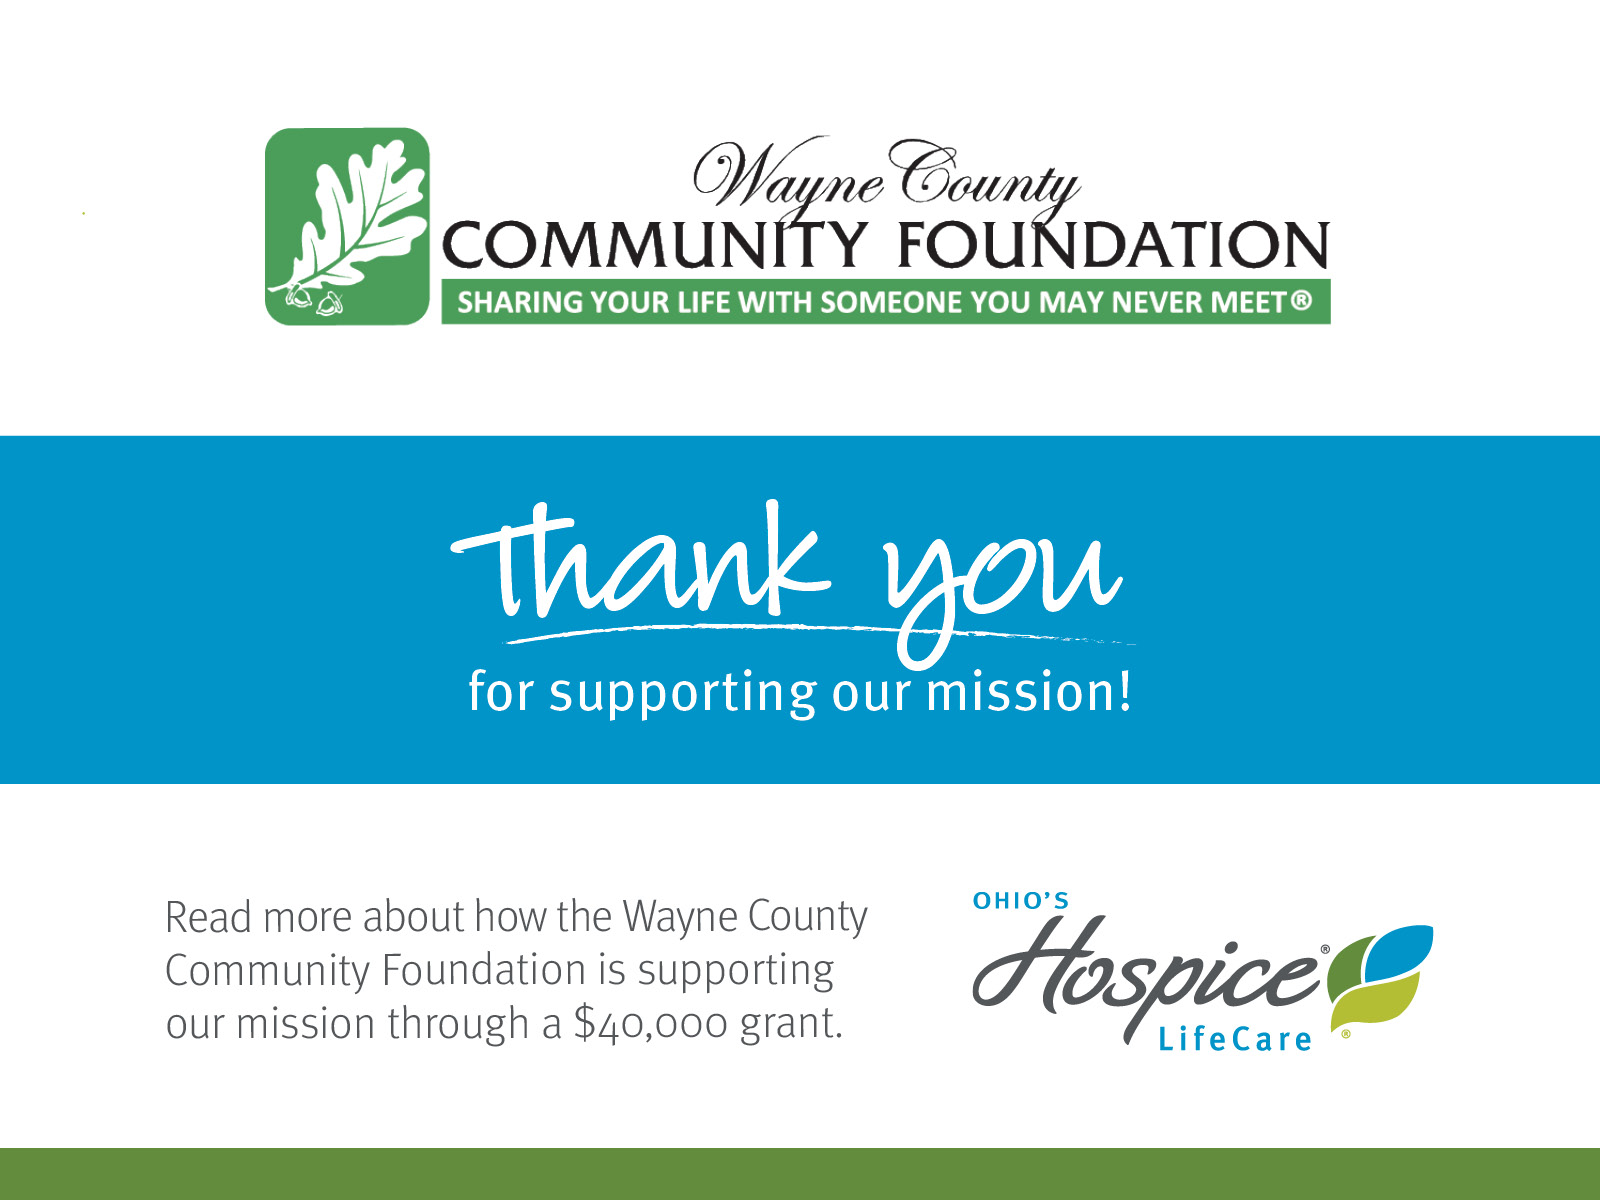 Wayne County Community Foundation. Thank you for supporting our mission! Read more about how the Wayne County Community Foundation is supporting our mission through a $40,000 grant. Ohio's Hospice LifeCare.